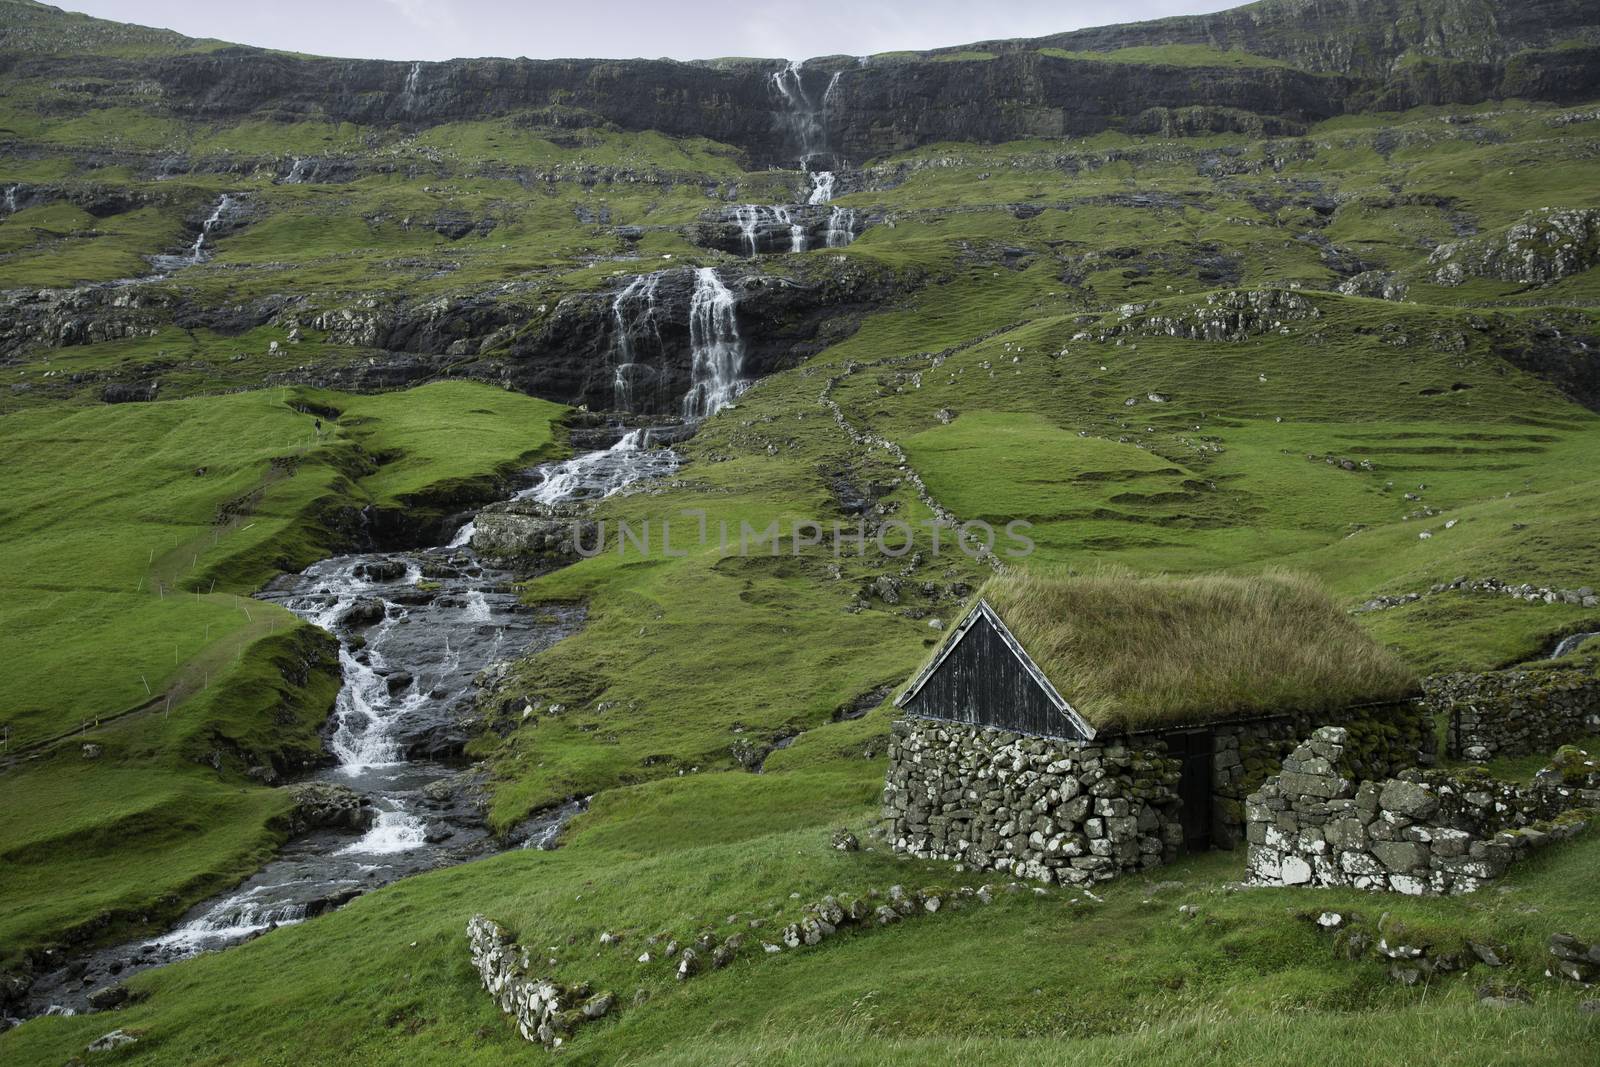 Saksun, Faroe Island - 18 September: Landscape showing a typical hut with grass roof and waterfall